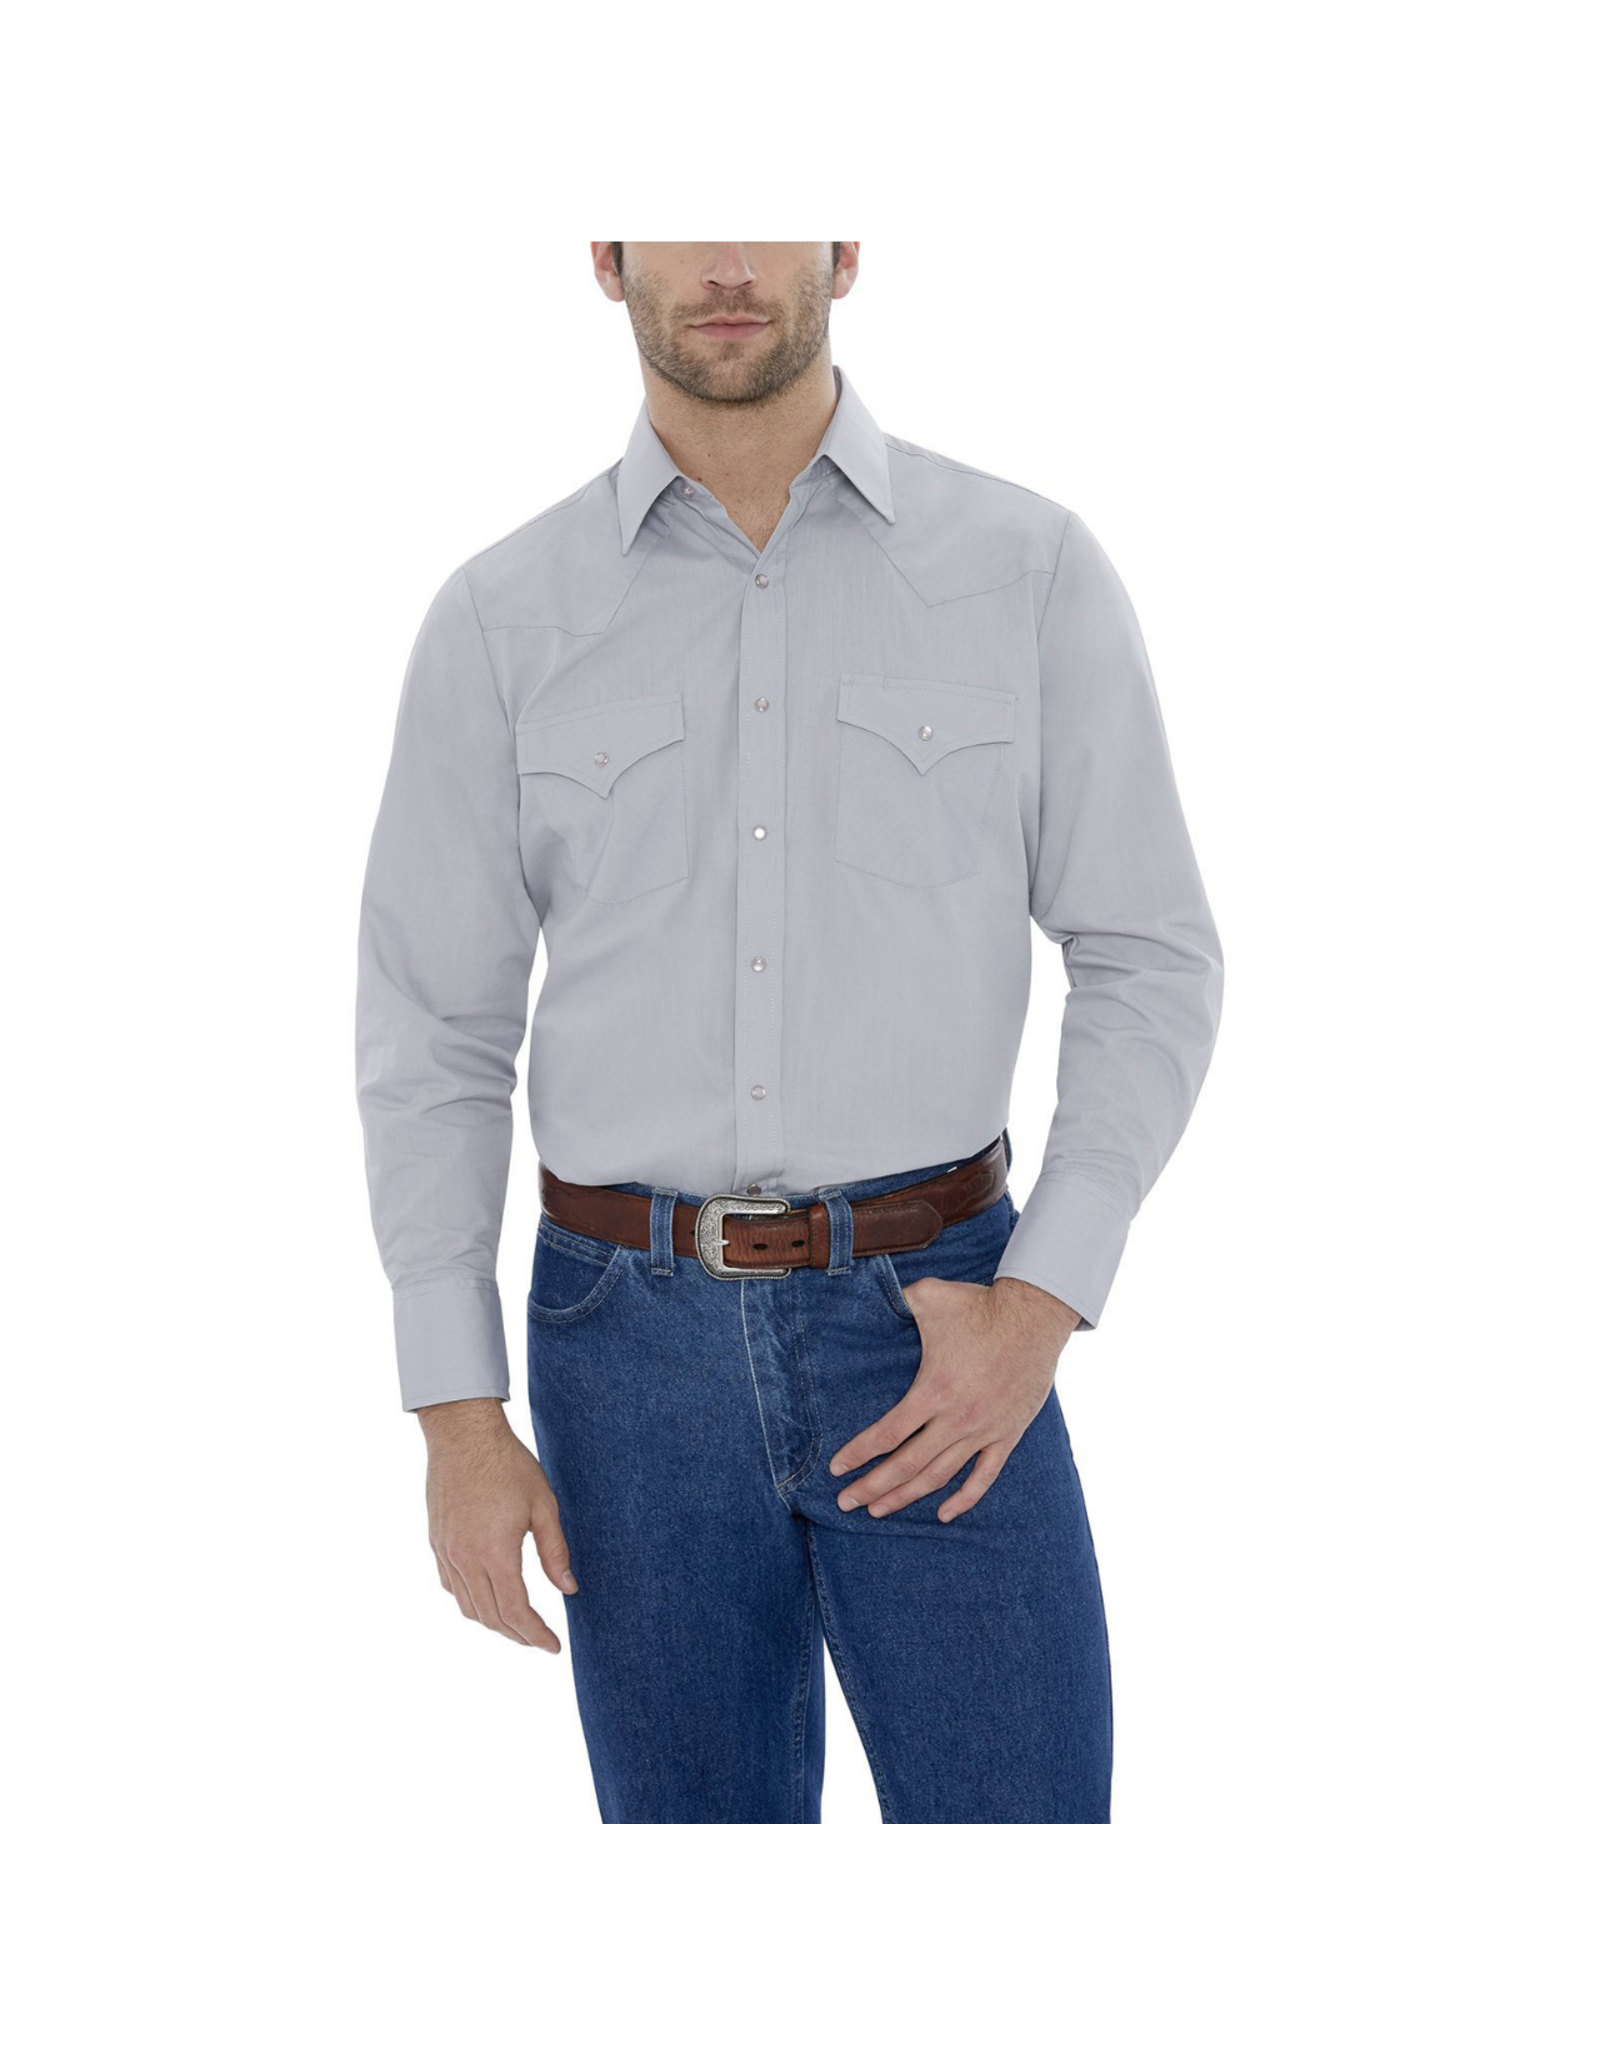 Ely Mens Long Sleeved Shirts in Grey 15201905-80